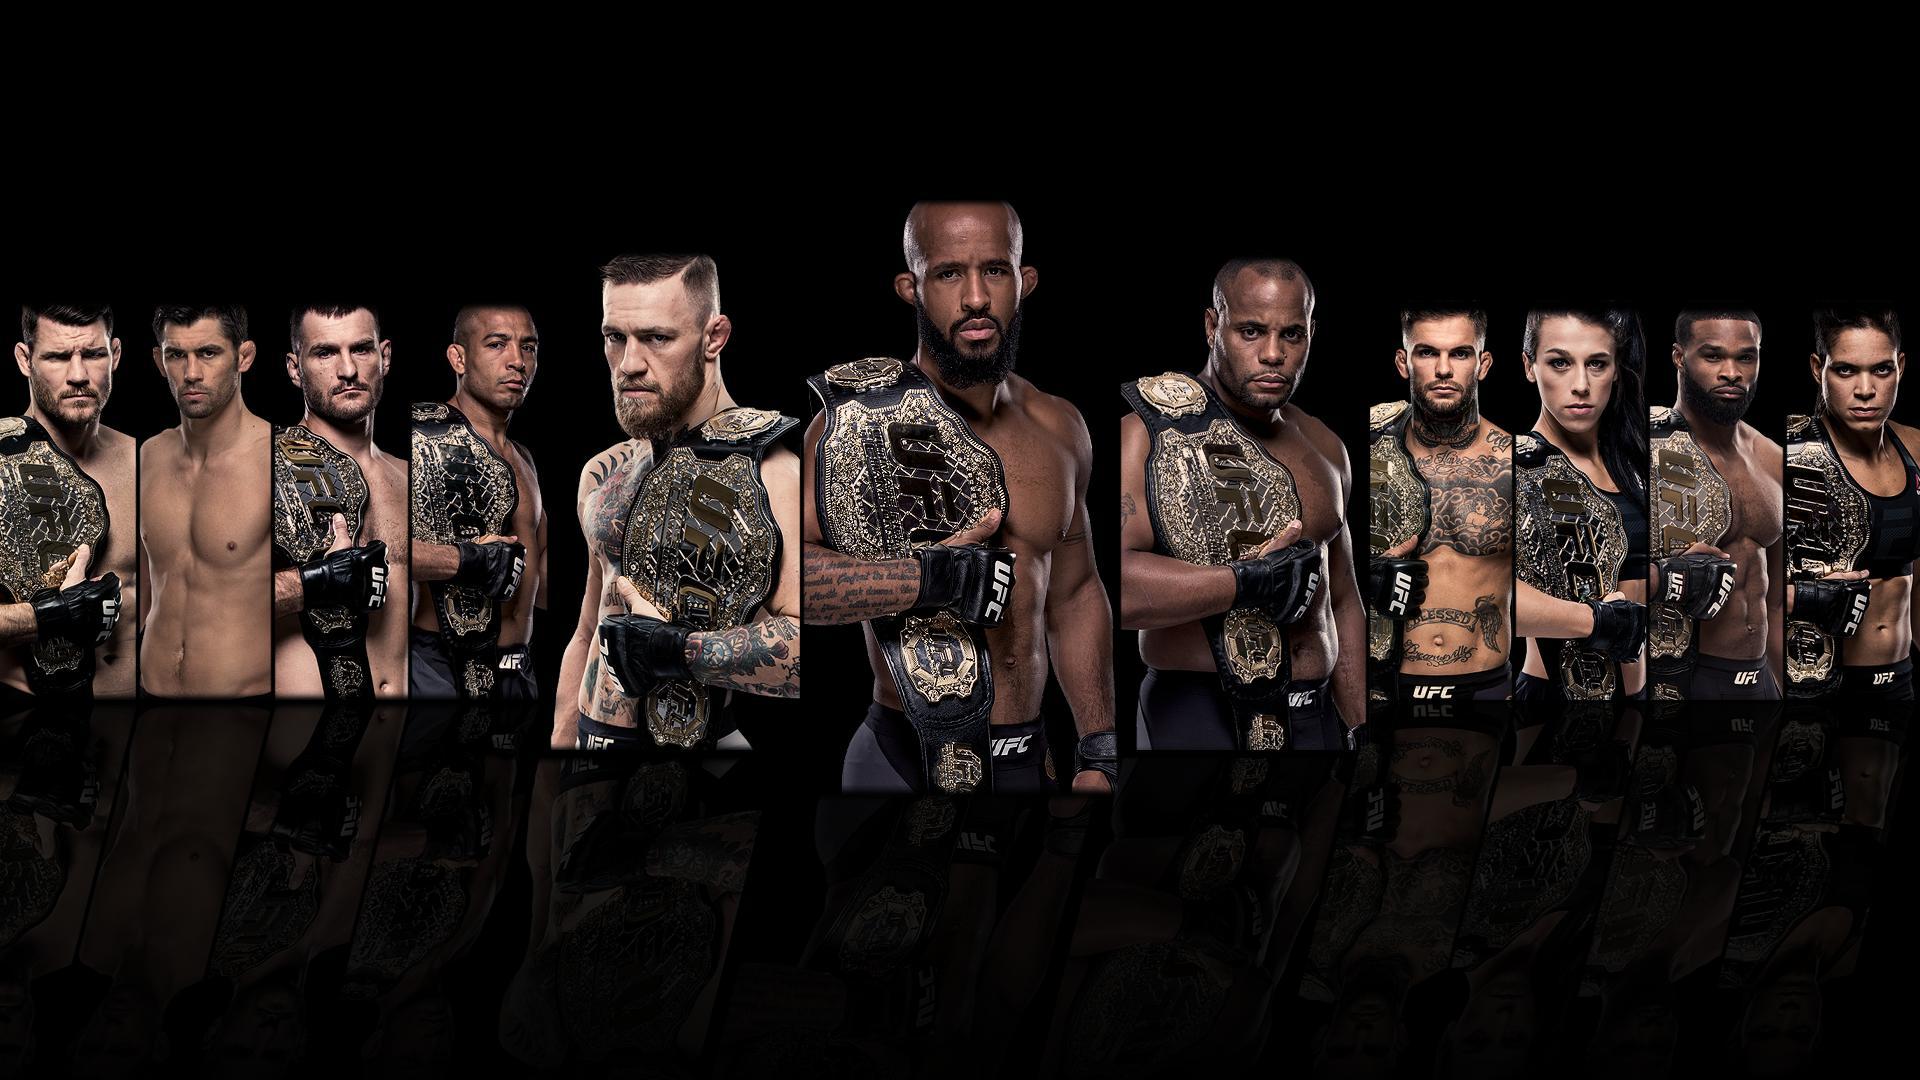 Ufc Wallpapers Fighters - Wallpaper Cave